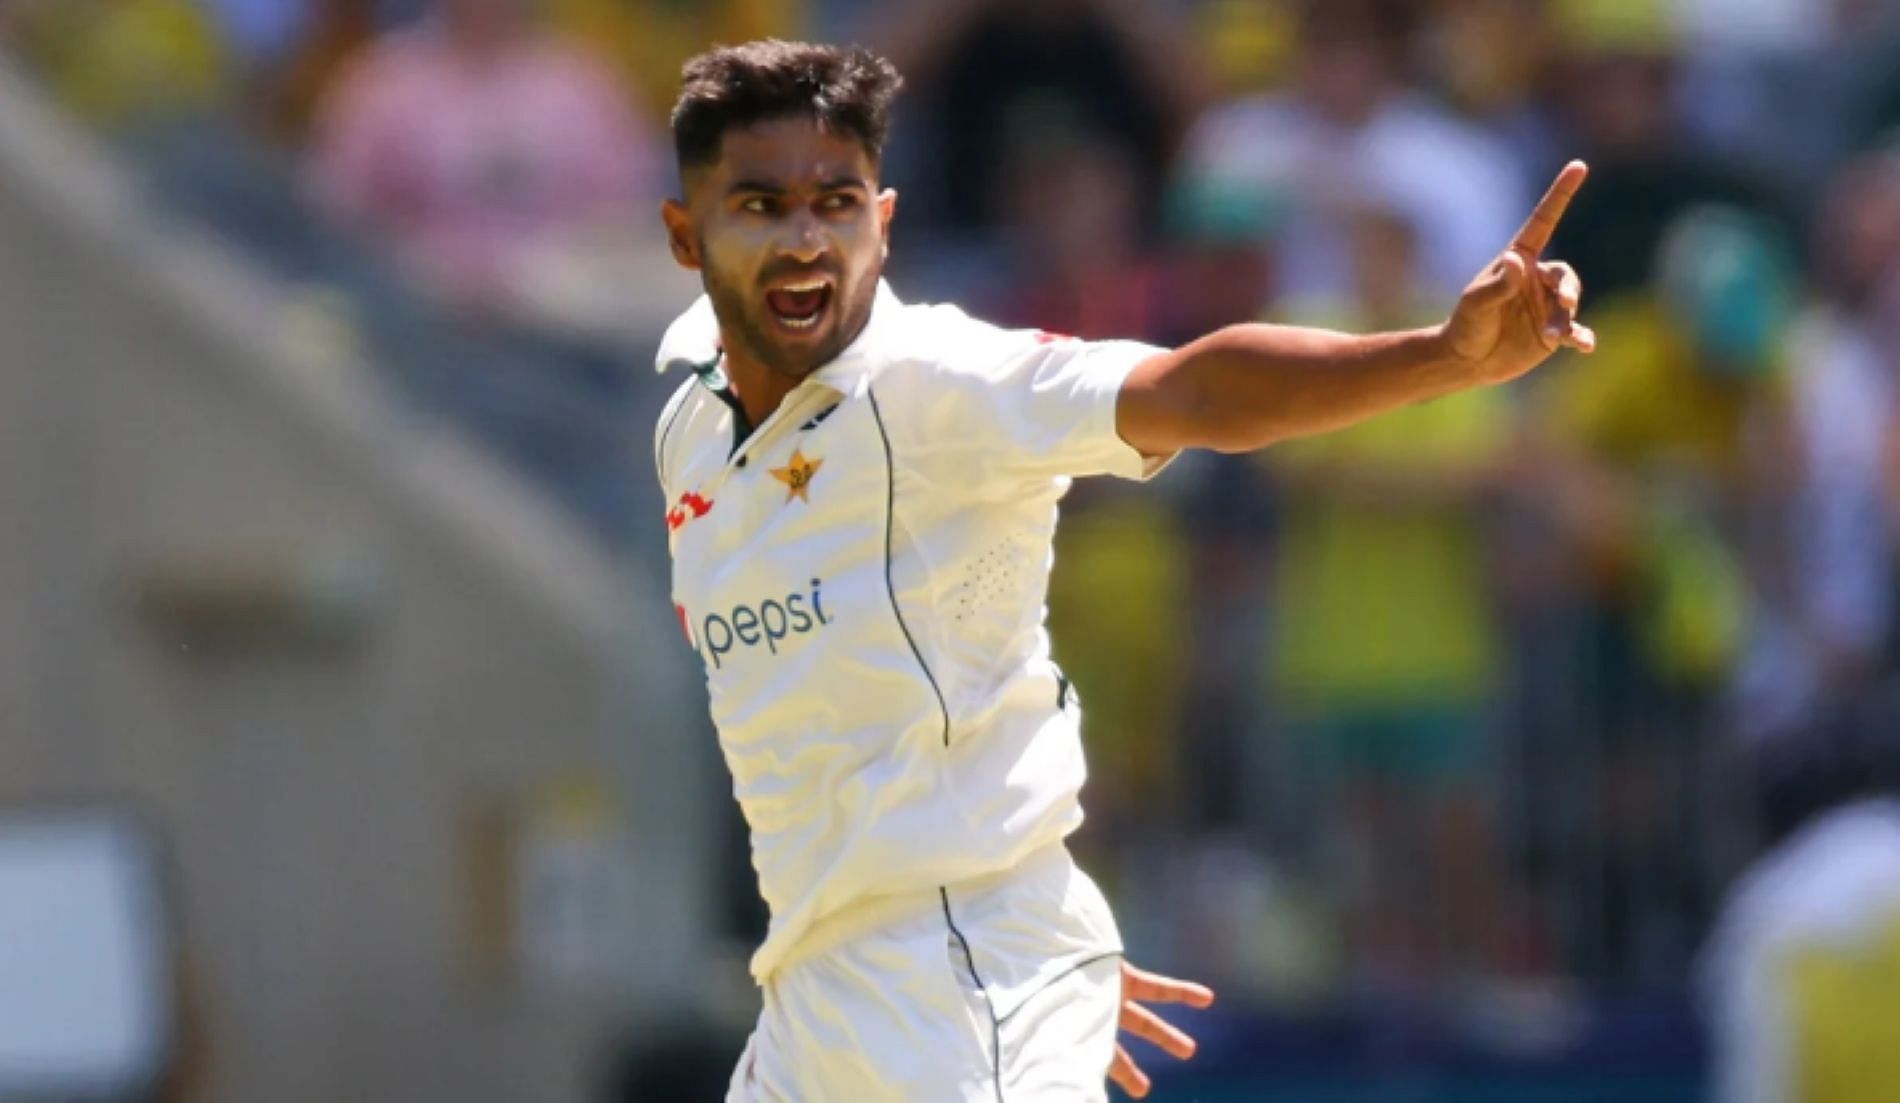 Shahazad had an impressive international debut in the first Test